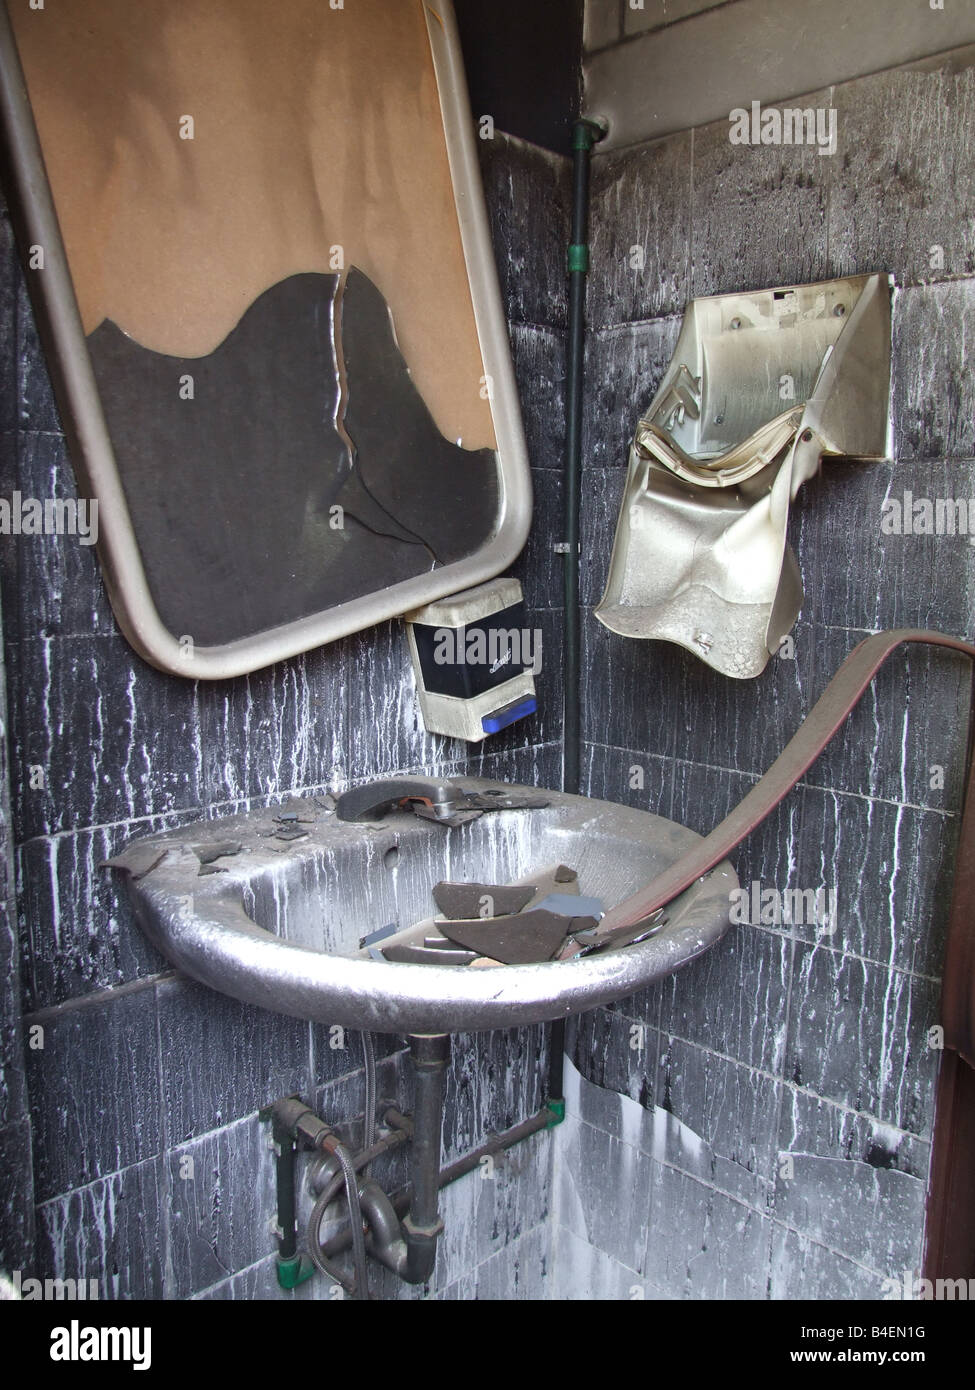 detail of bathroom destroyed by fire Stock Photo